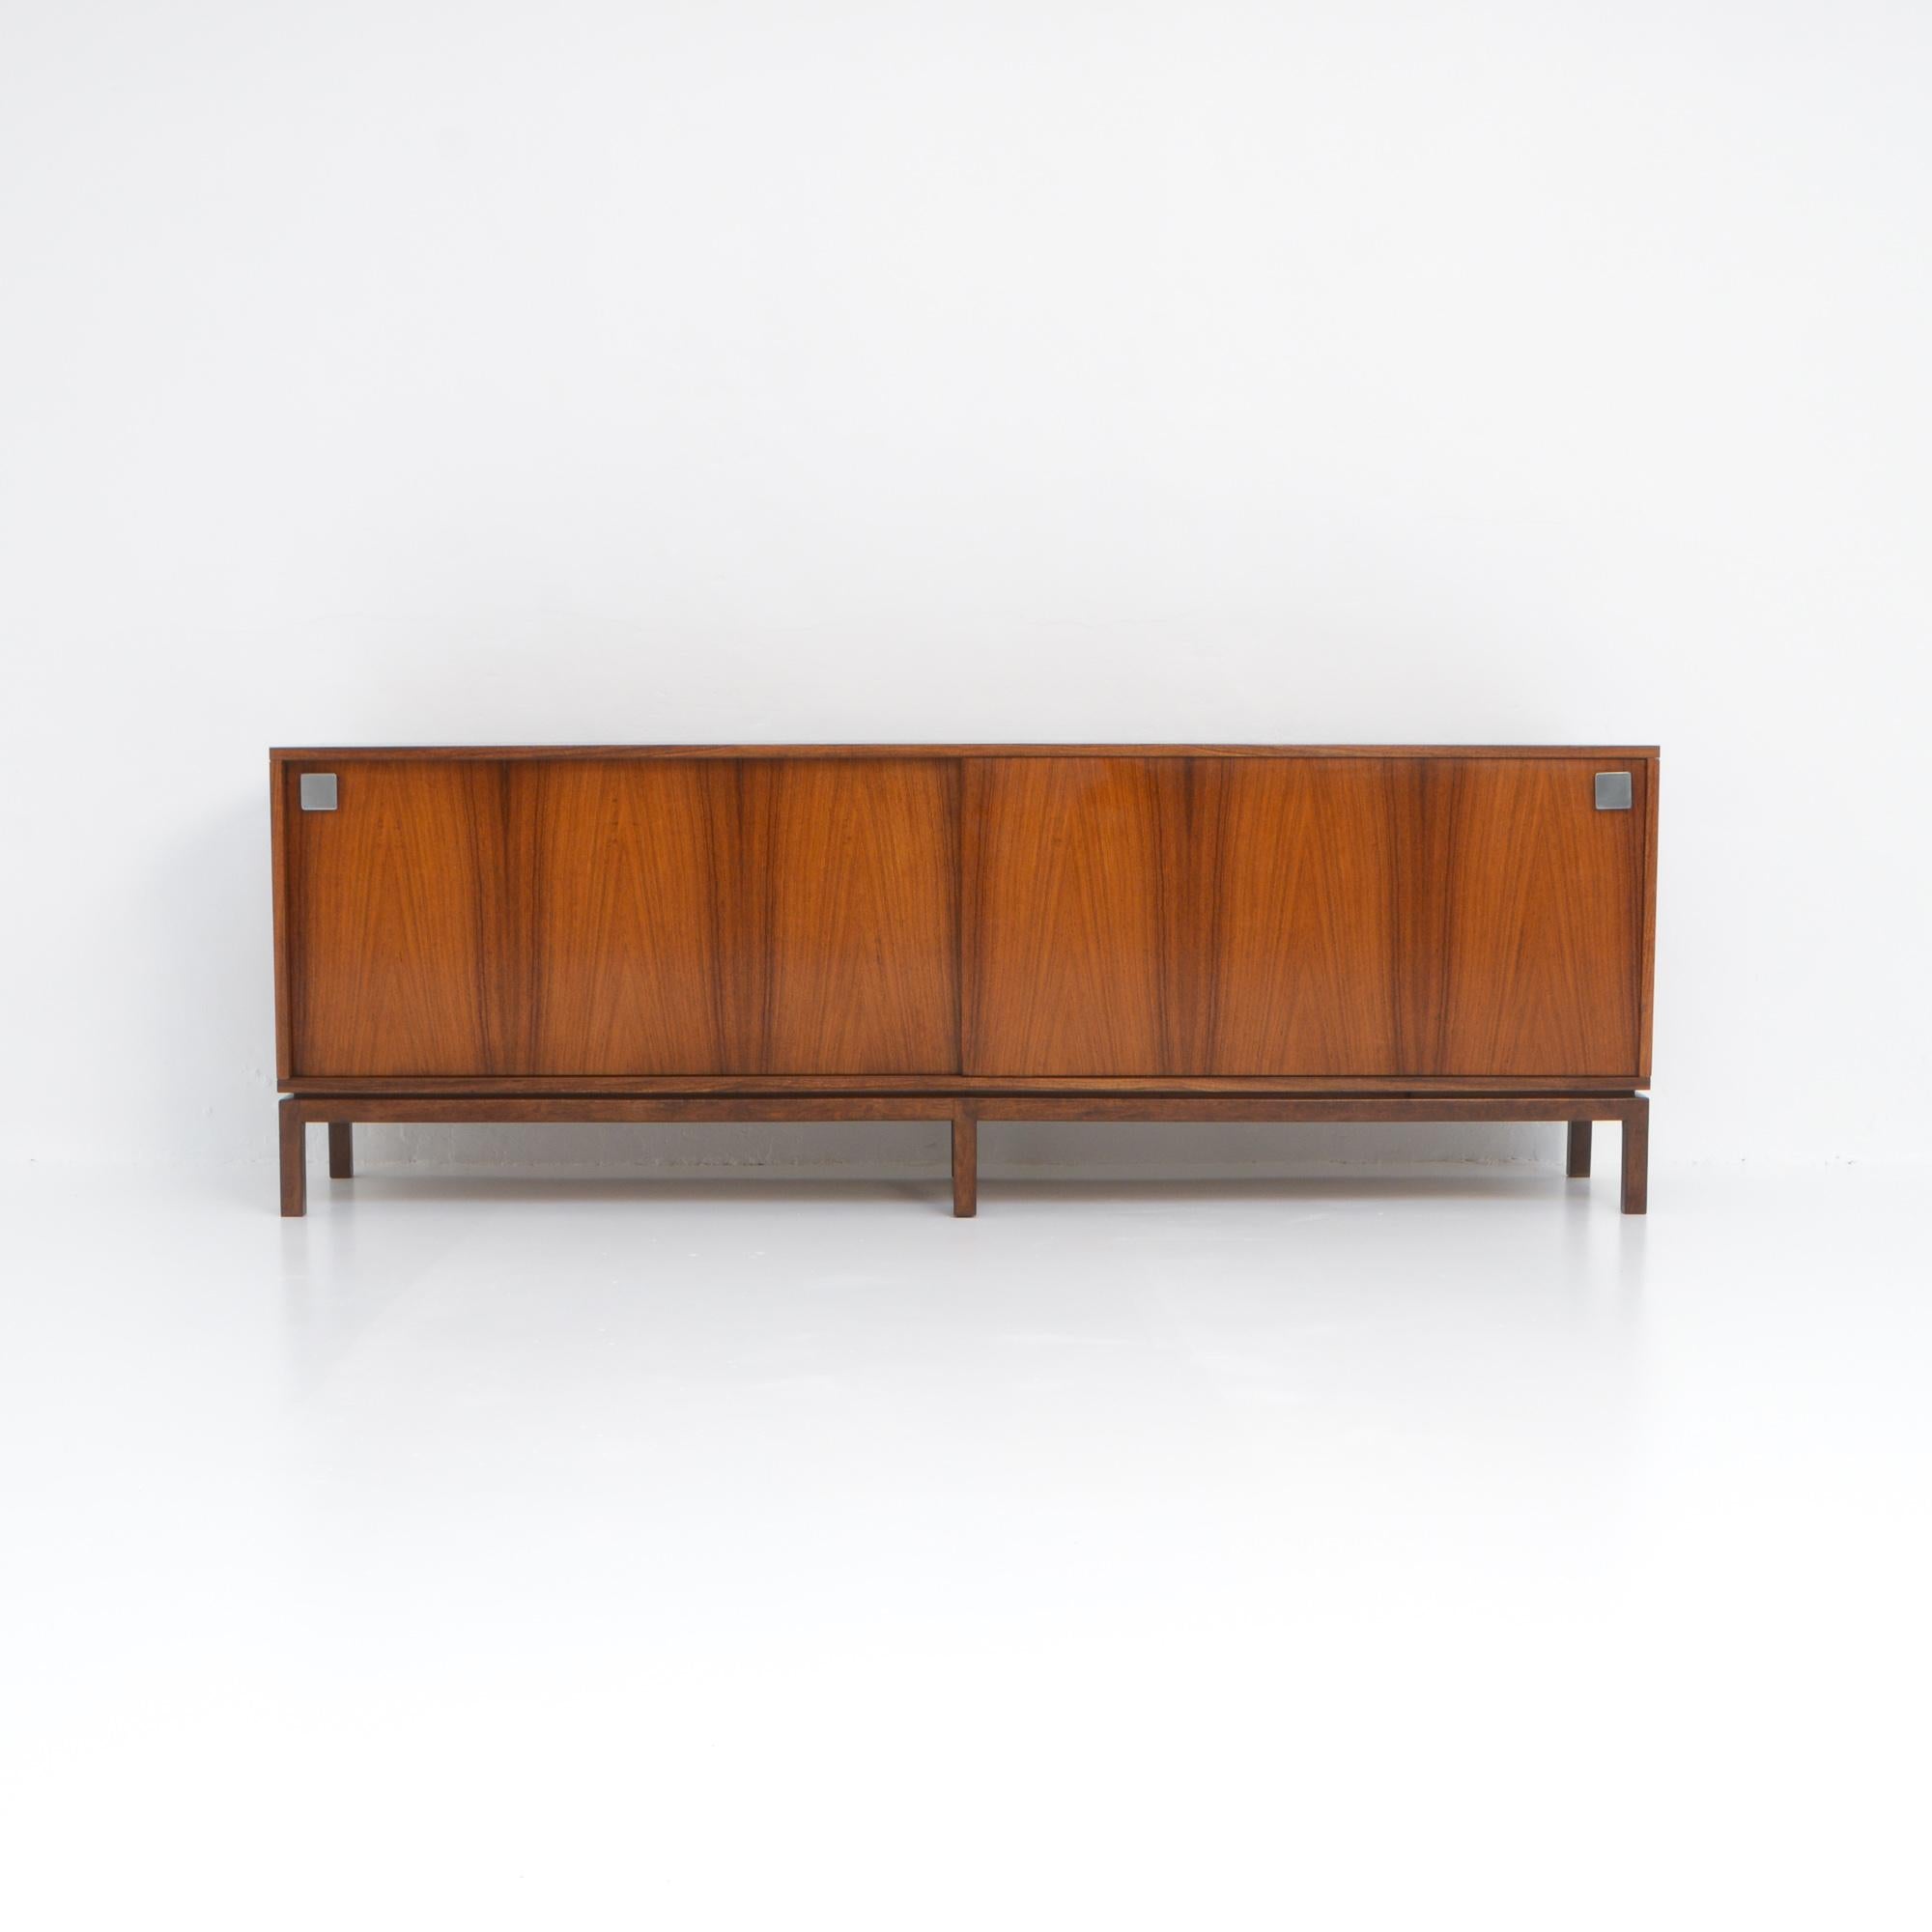 This beautiful sideboard was designed by Alfred Hendrickx in the 1960s.
It is a pure design and a high quality piece of furniture.
The pattern of the wood veneer of the 2 sliding doors is amazing and creates a dynamic effect, the sleek wooden base